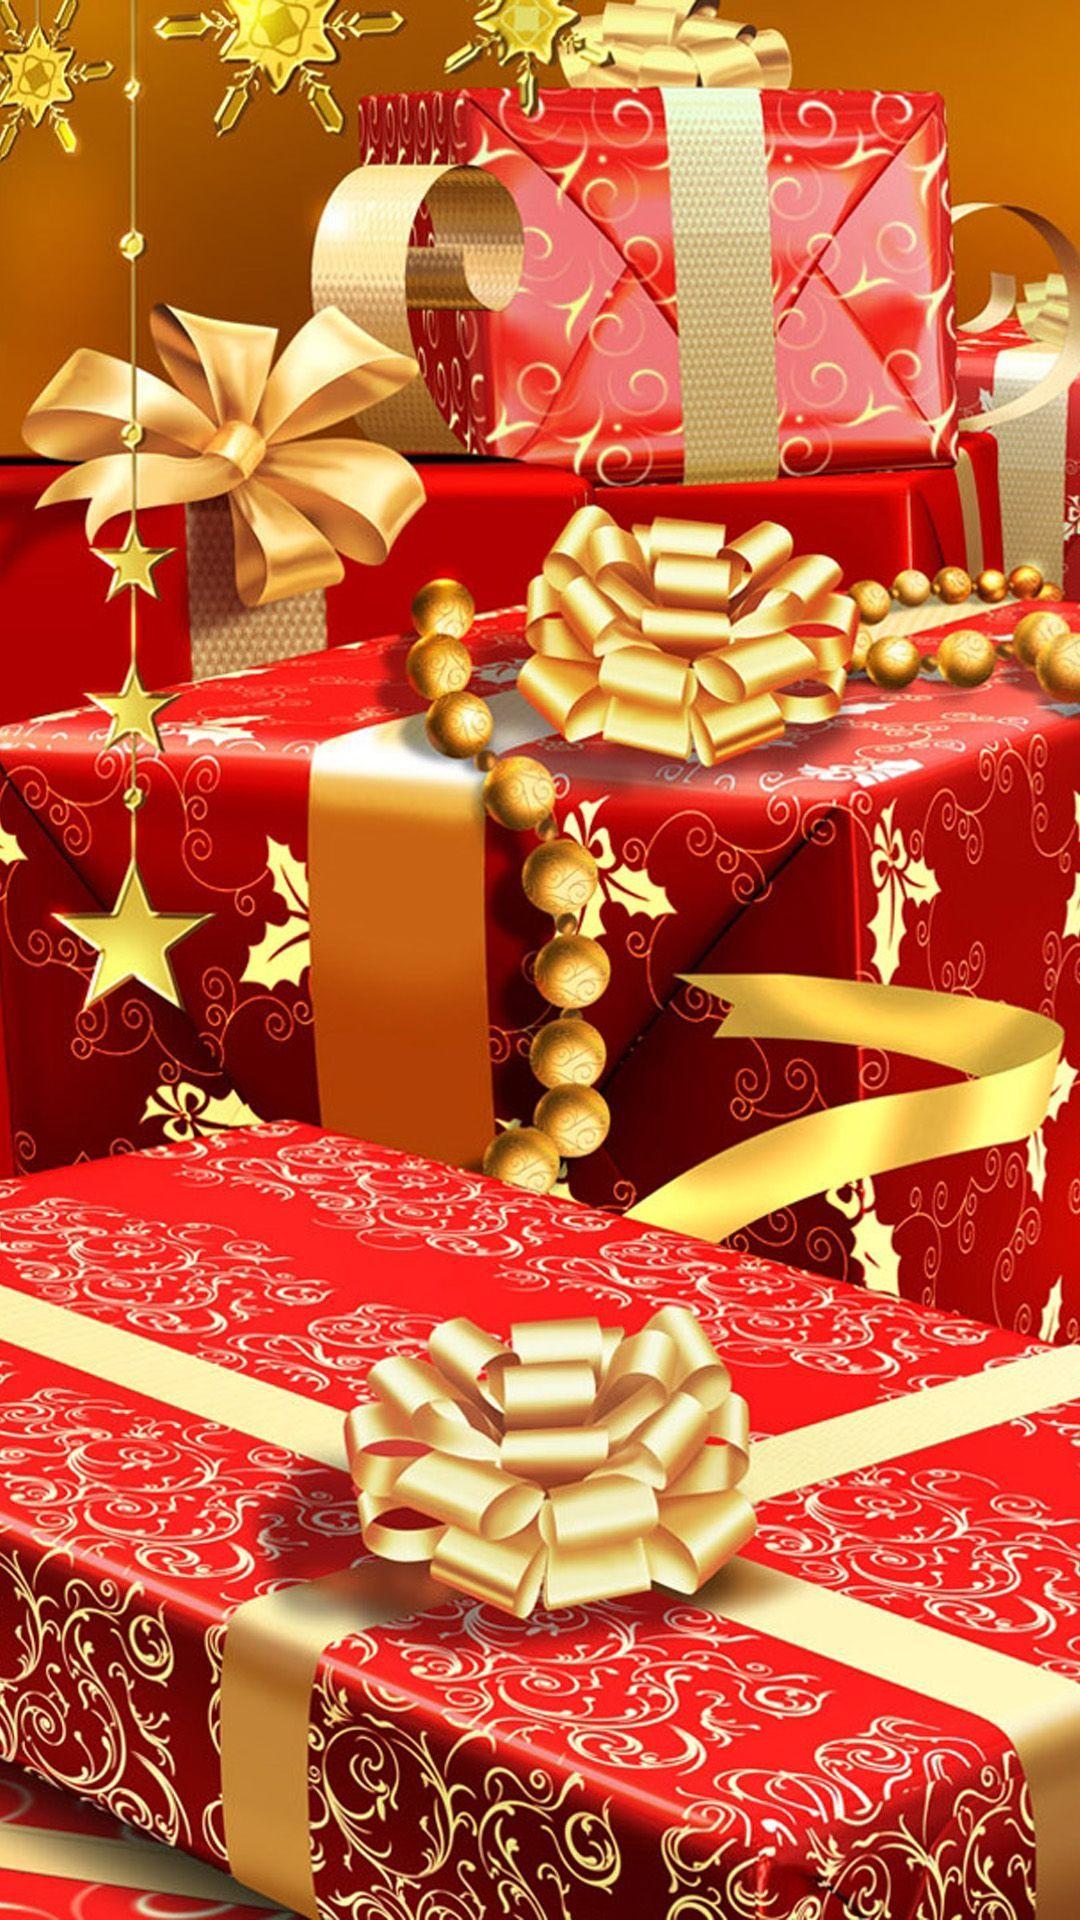 Rich Christmas Gifts iPhone 6 Wallpaper Download. iPhone Wallpaper, iPad wallpaper On. Wallpaper iphone christmas, Christmas wallpaper, Christmas wallpaper hd